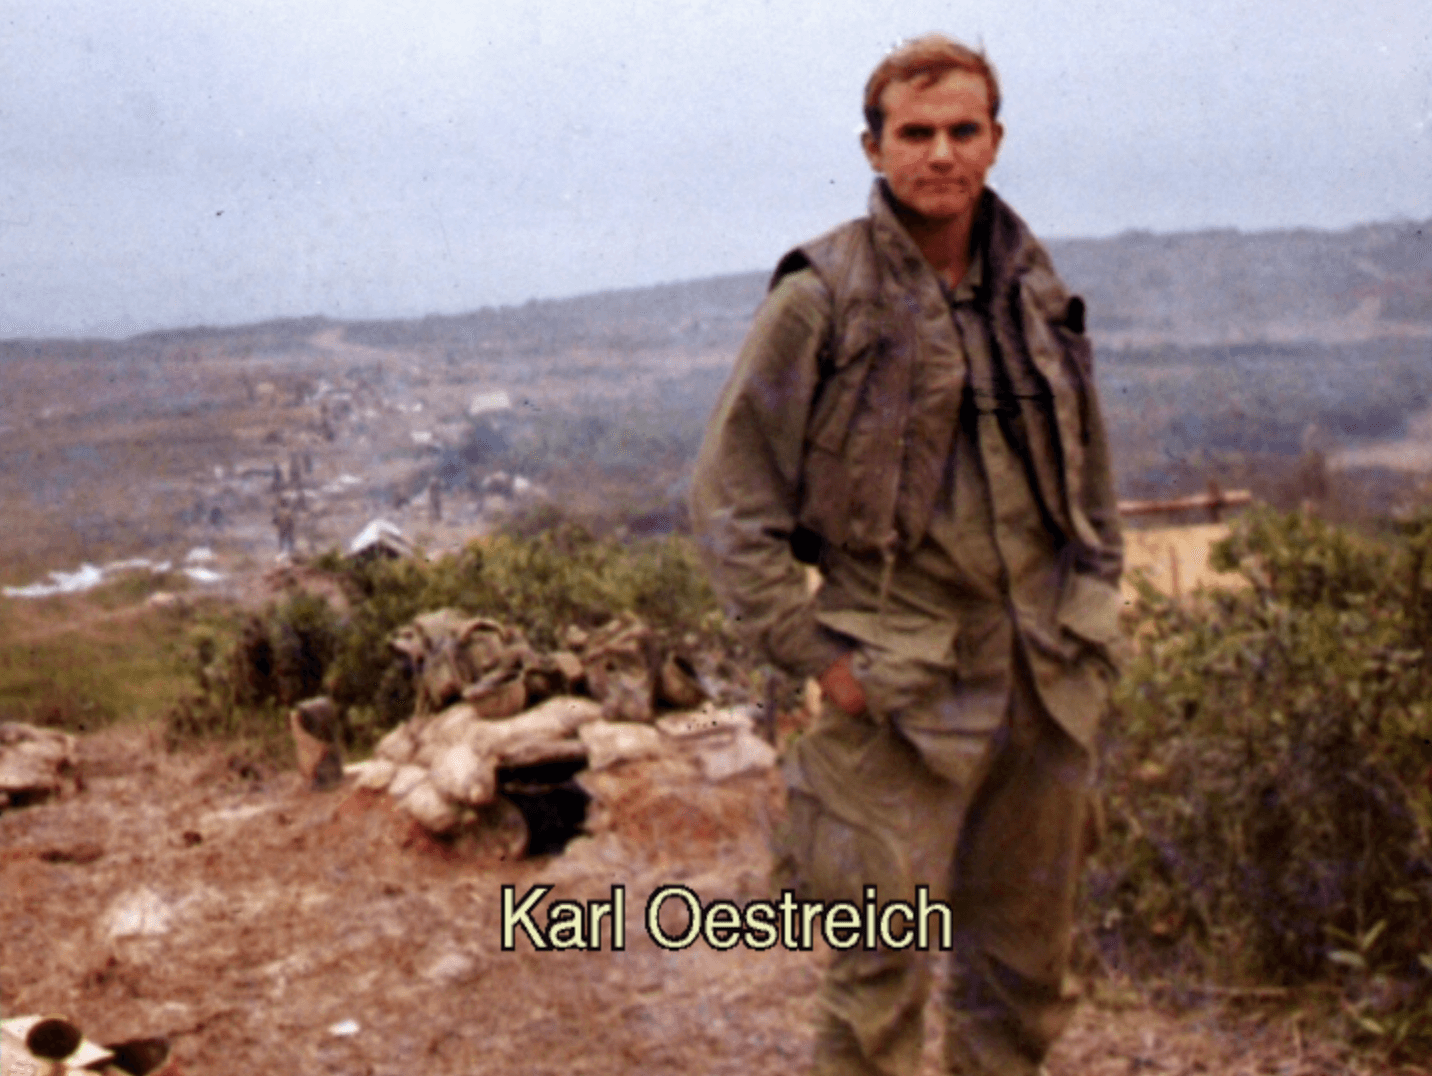 A soldier standing on an overlook with his hands in his pockets. Text on photo says "Karl Oestreich."